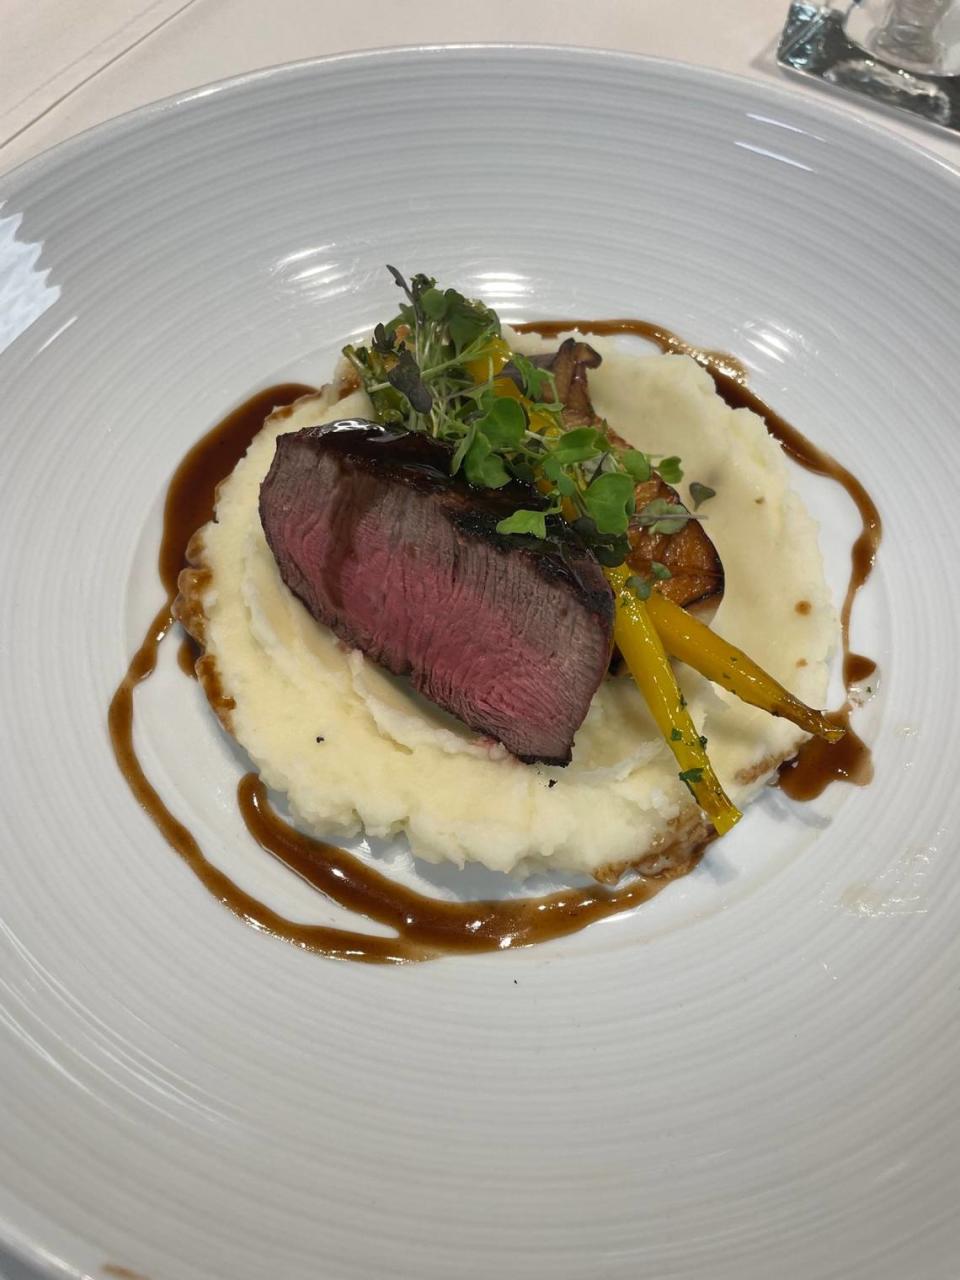 The Brown Hotel Chef’s Table special dinner menu included Center Cut Filet Mignon in a recent preview. Provided